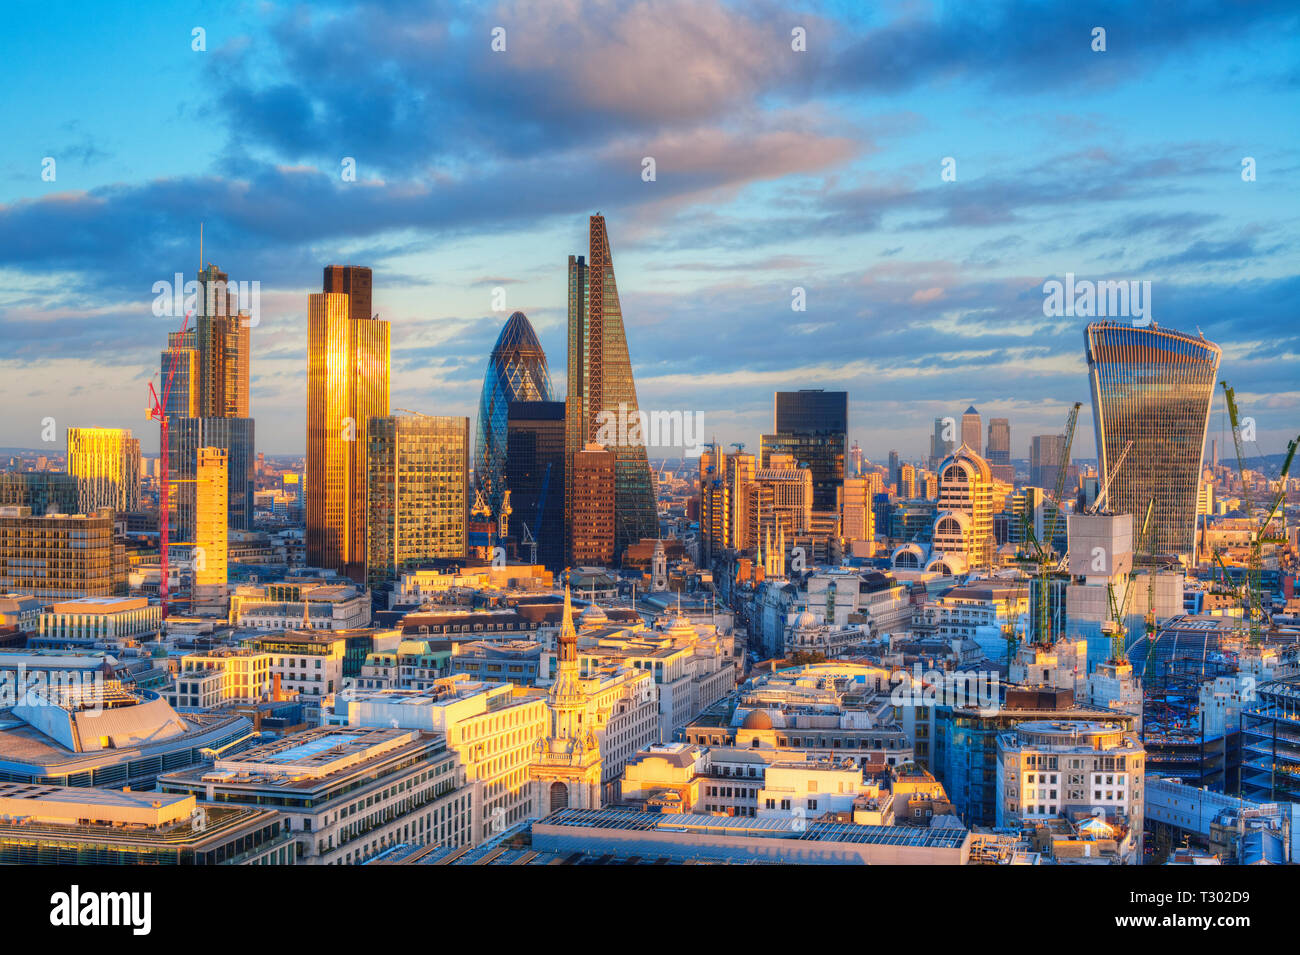 Elevated view of the Financial District of London Stock Photo